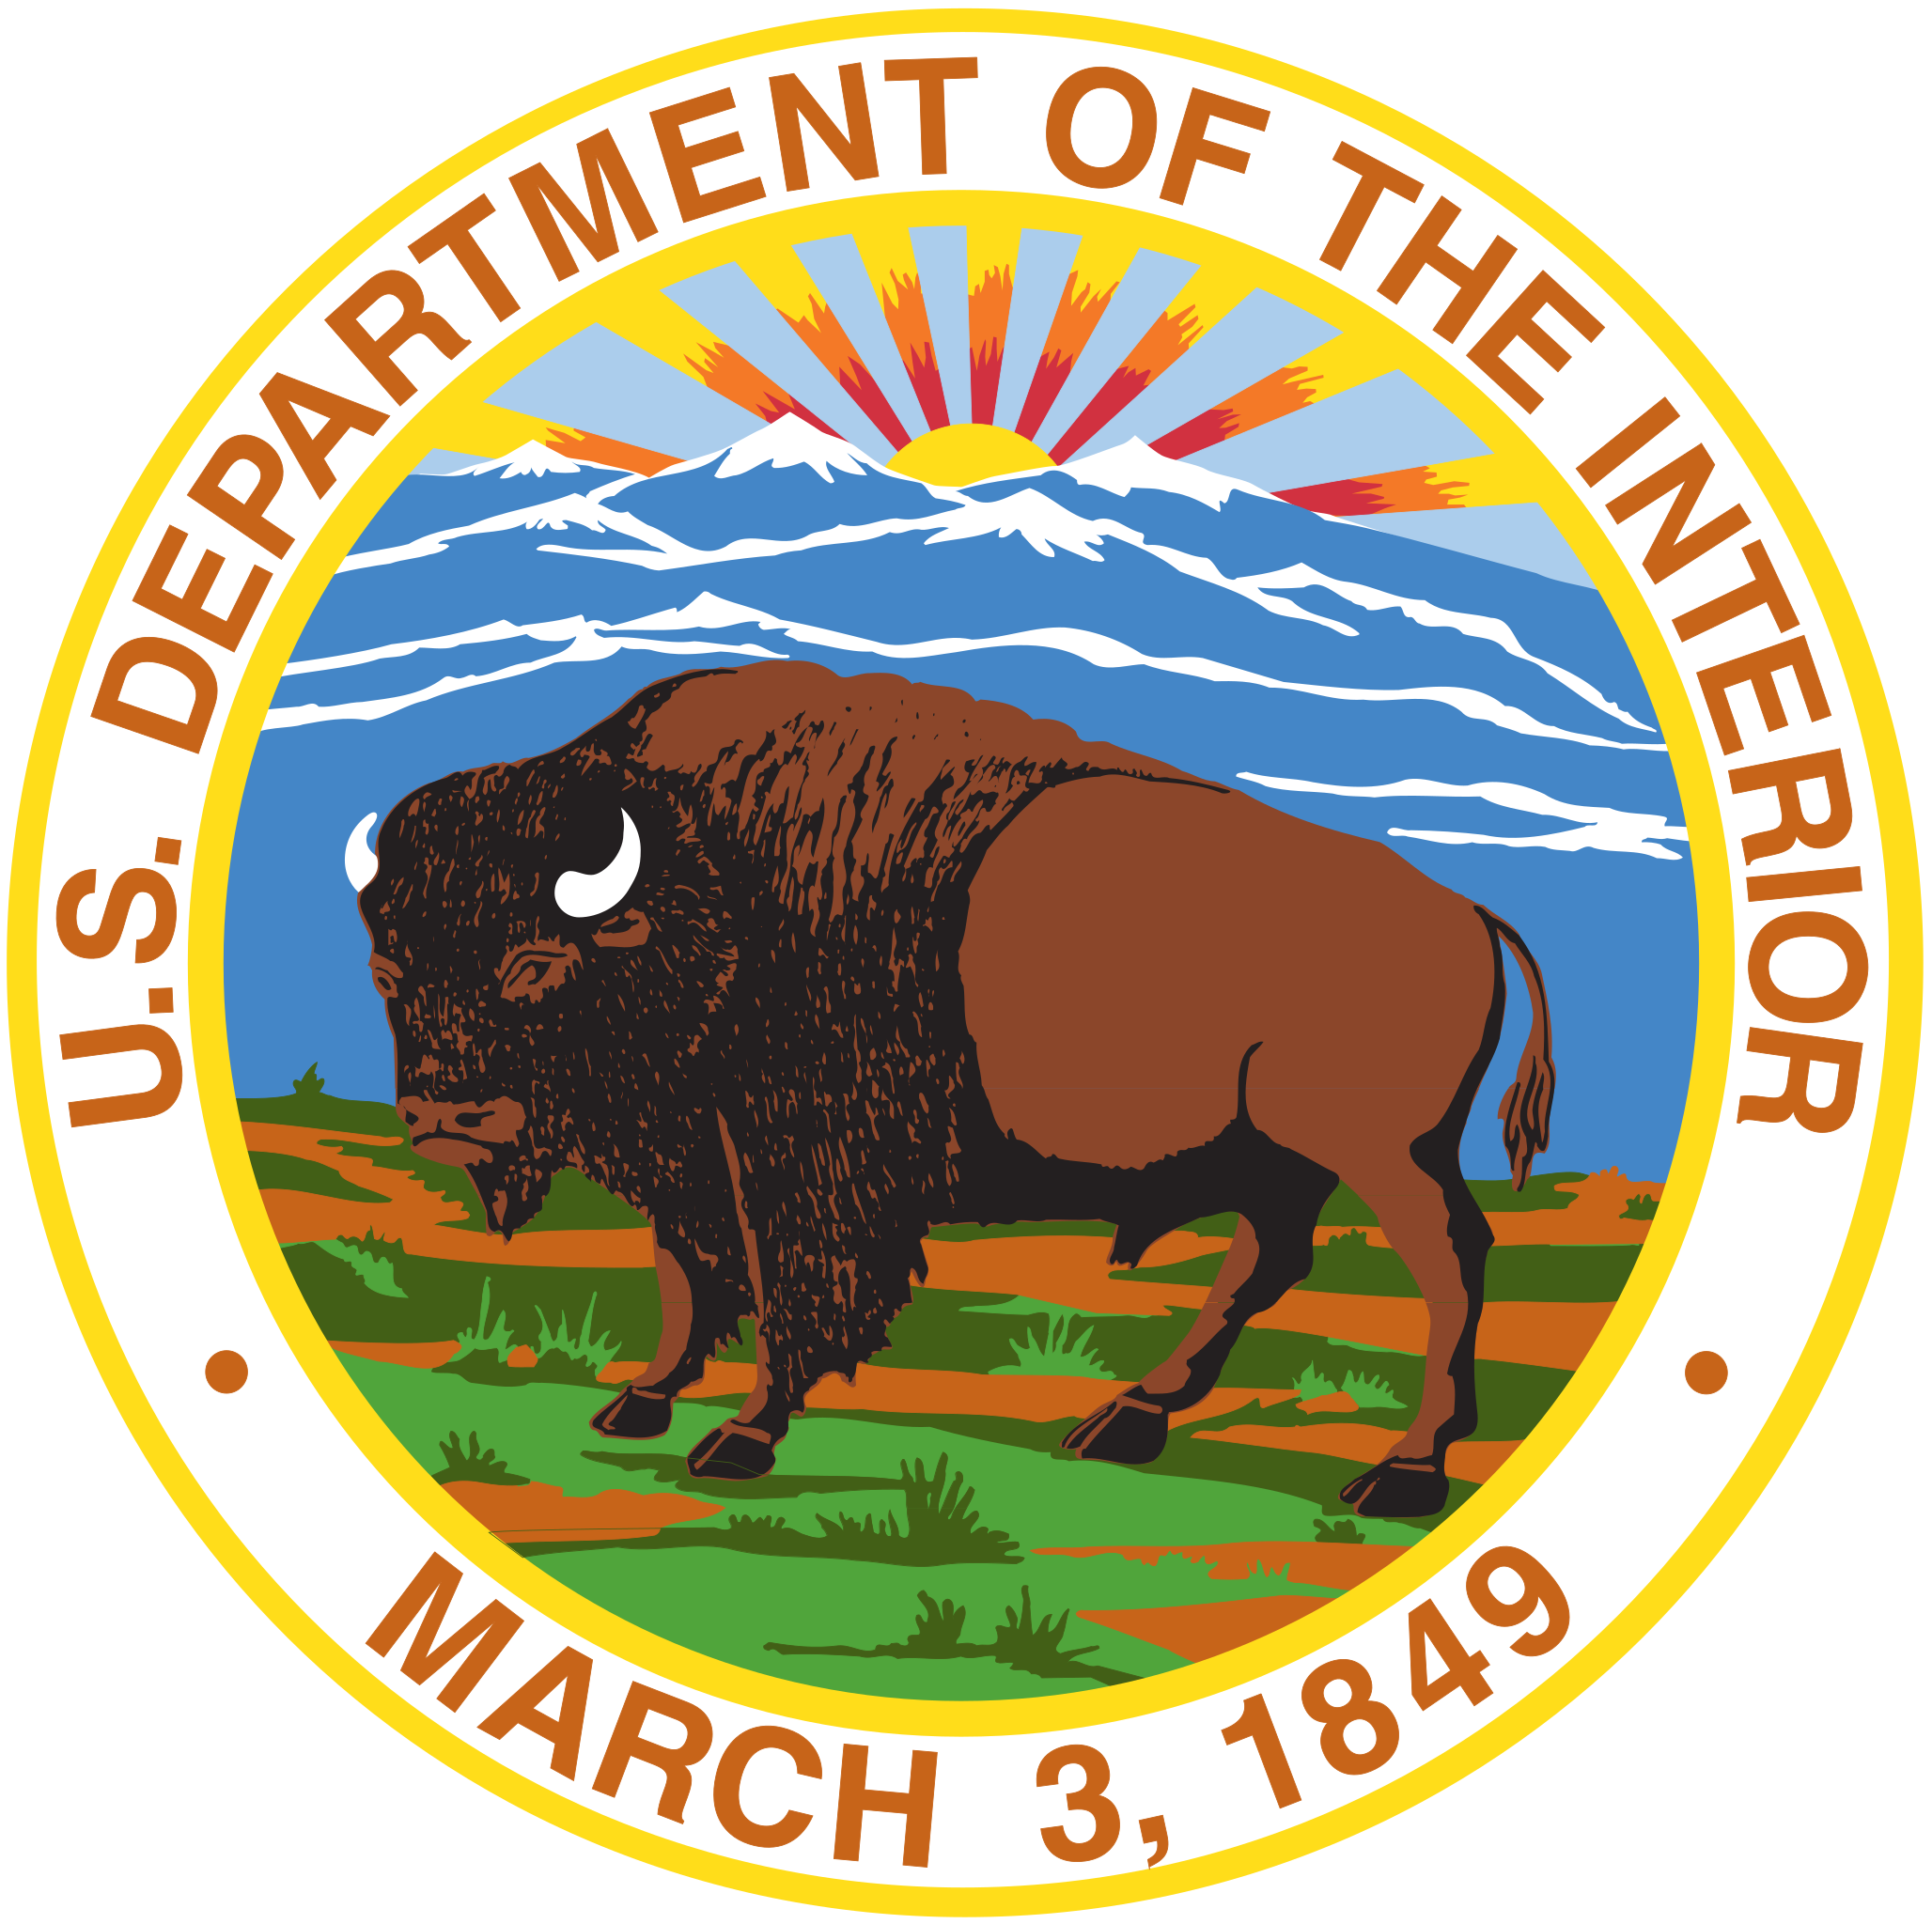 Circular seal with the words U.S. Department of the Interior across the top and March 3, 1849. across the bottom.  A bull bison stands on a prairie in the center looking left with mountains and a rising sun in the background.